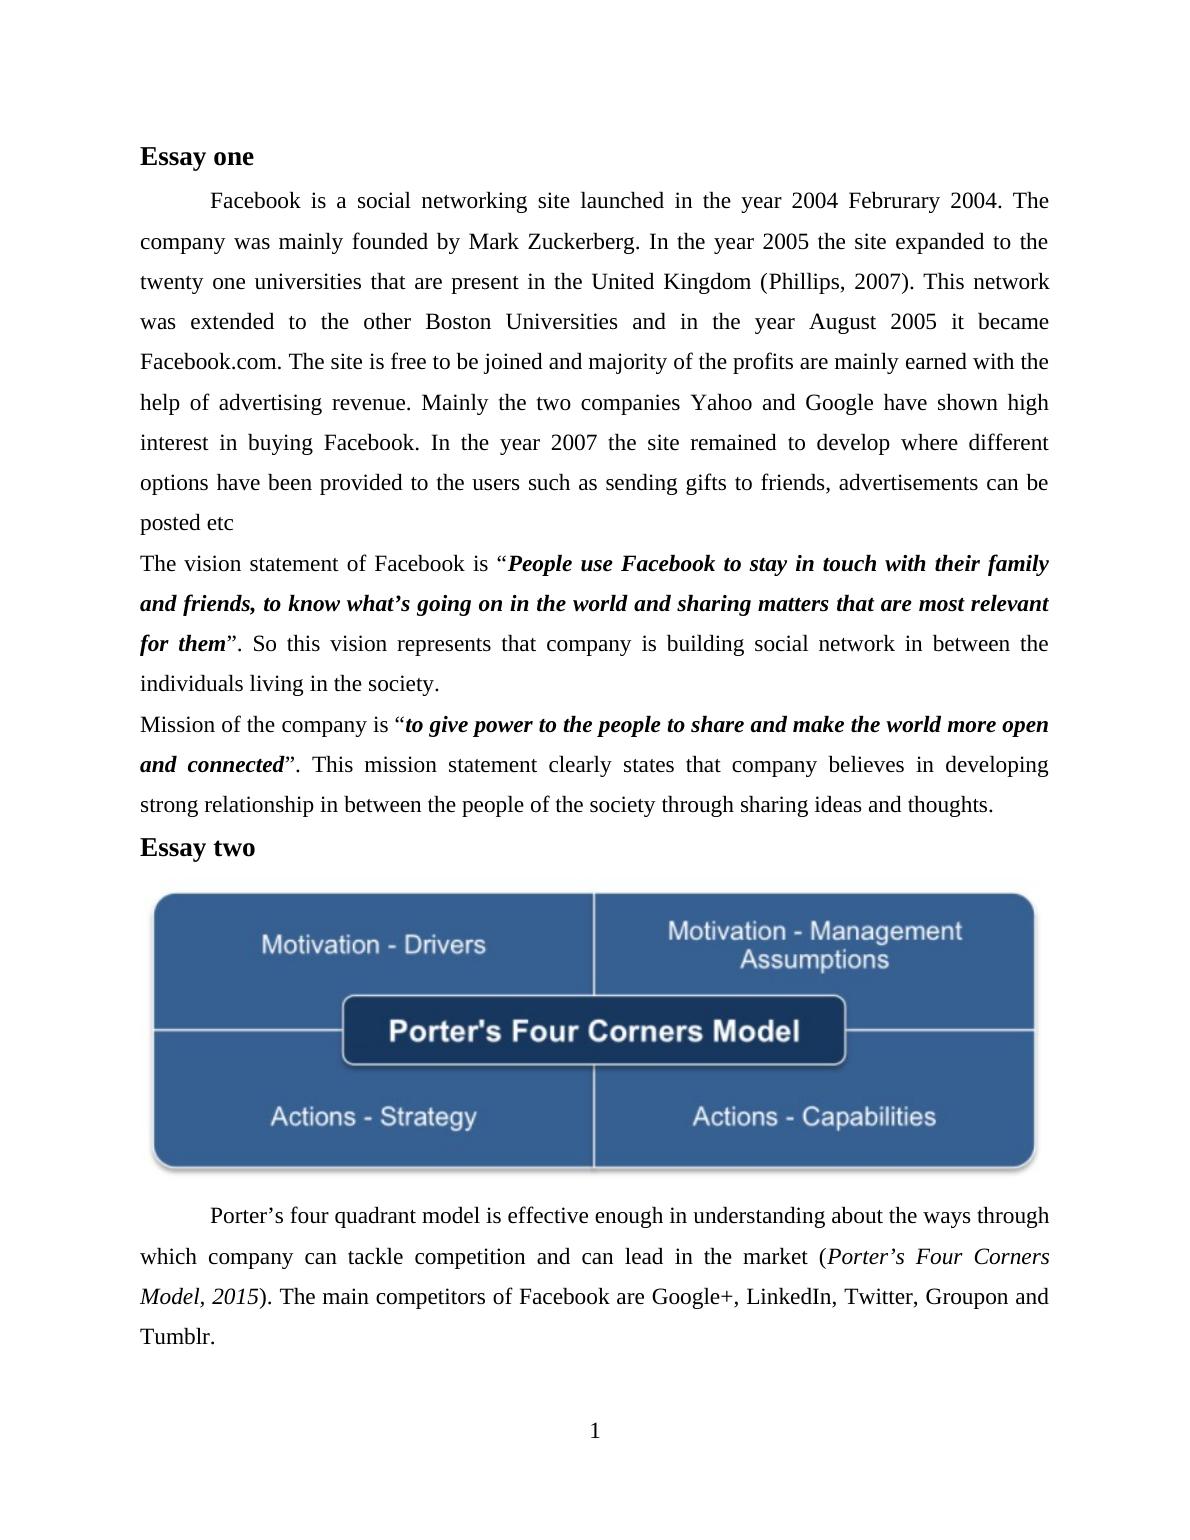 Facebook and Porter's Four Quadrant Model: An Analysis_3